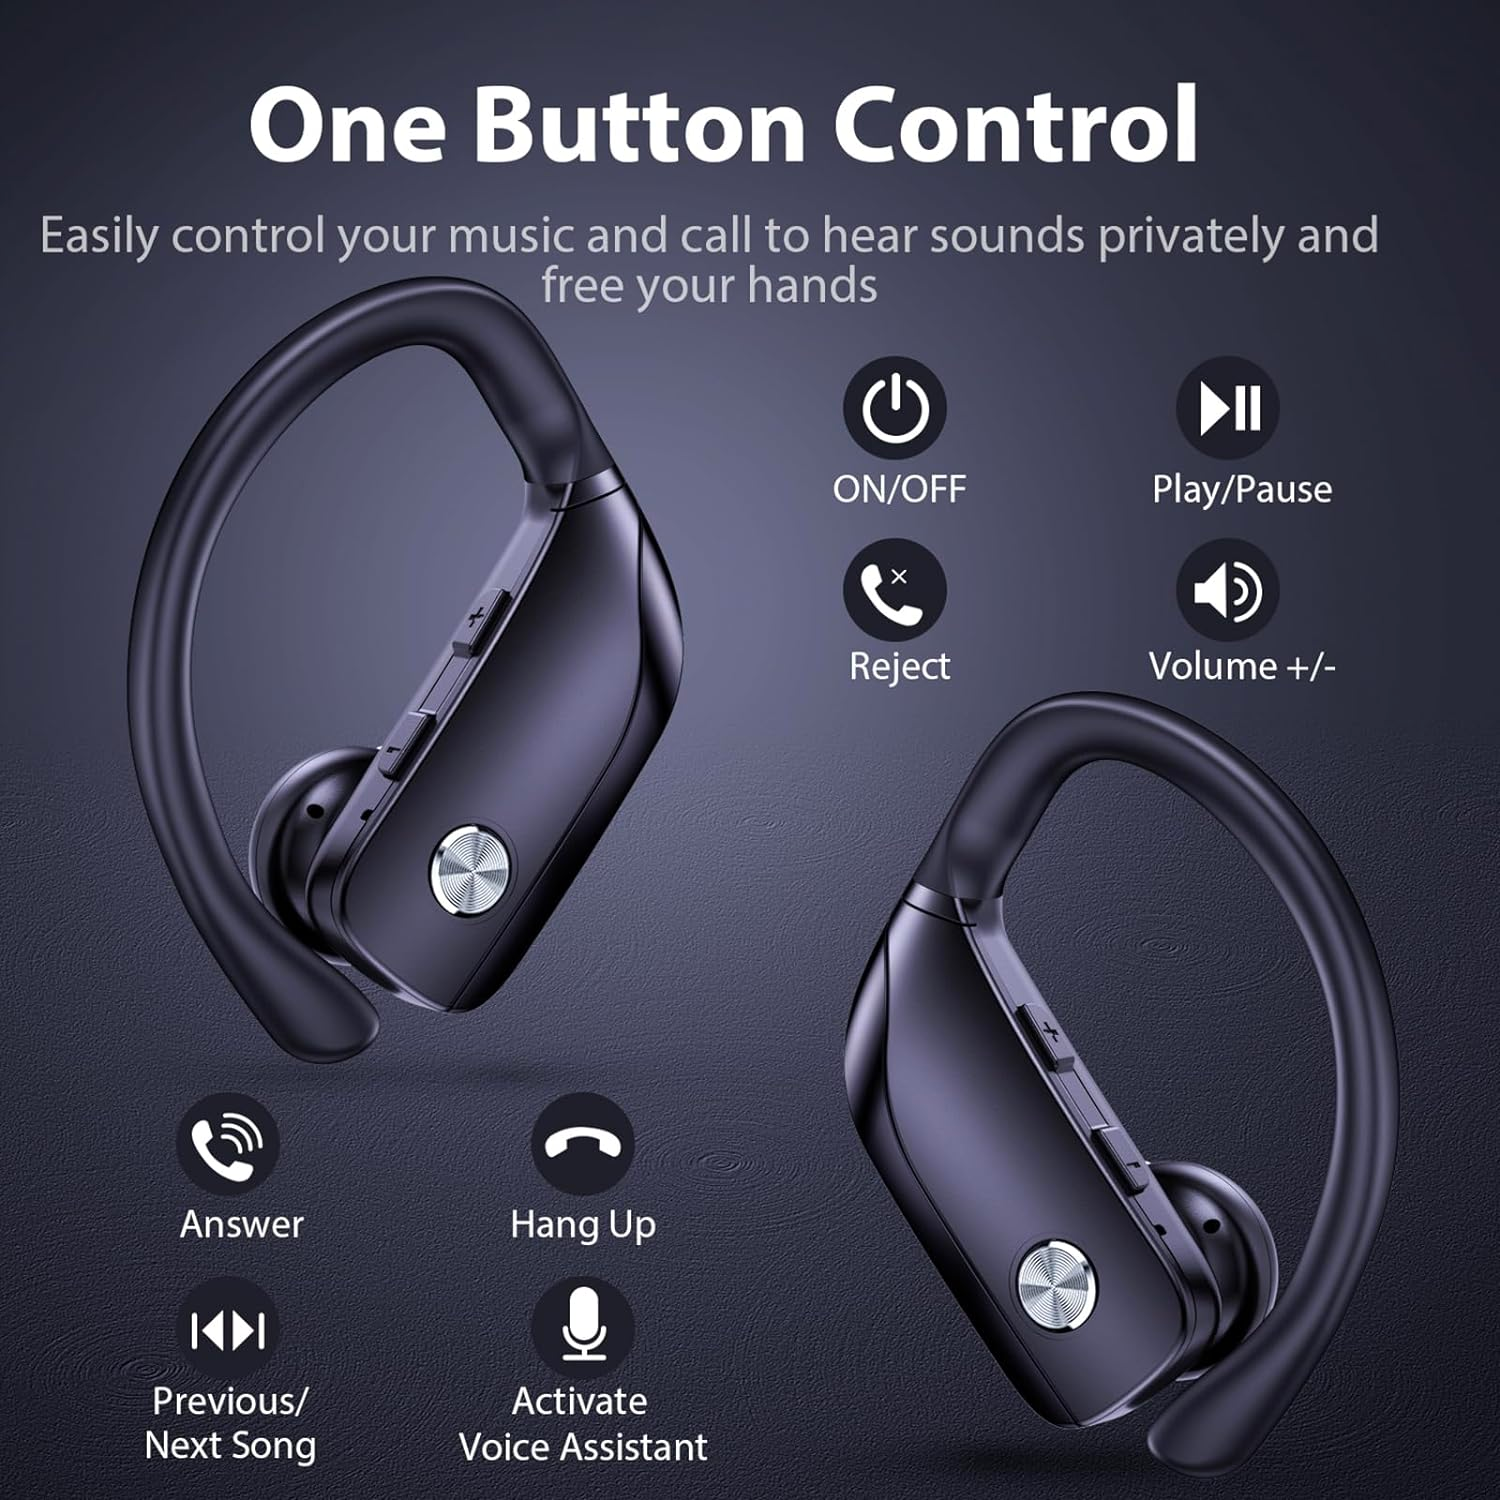 The bmanl Wireless Earbuds Bluetooth Headphones have a sleek black design that makes them look sophisticated and up-to-date. This makes them a stylish accessory for any event. 